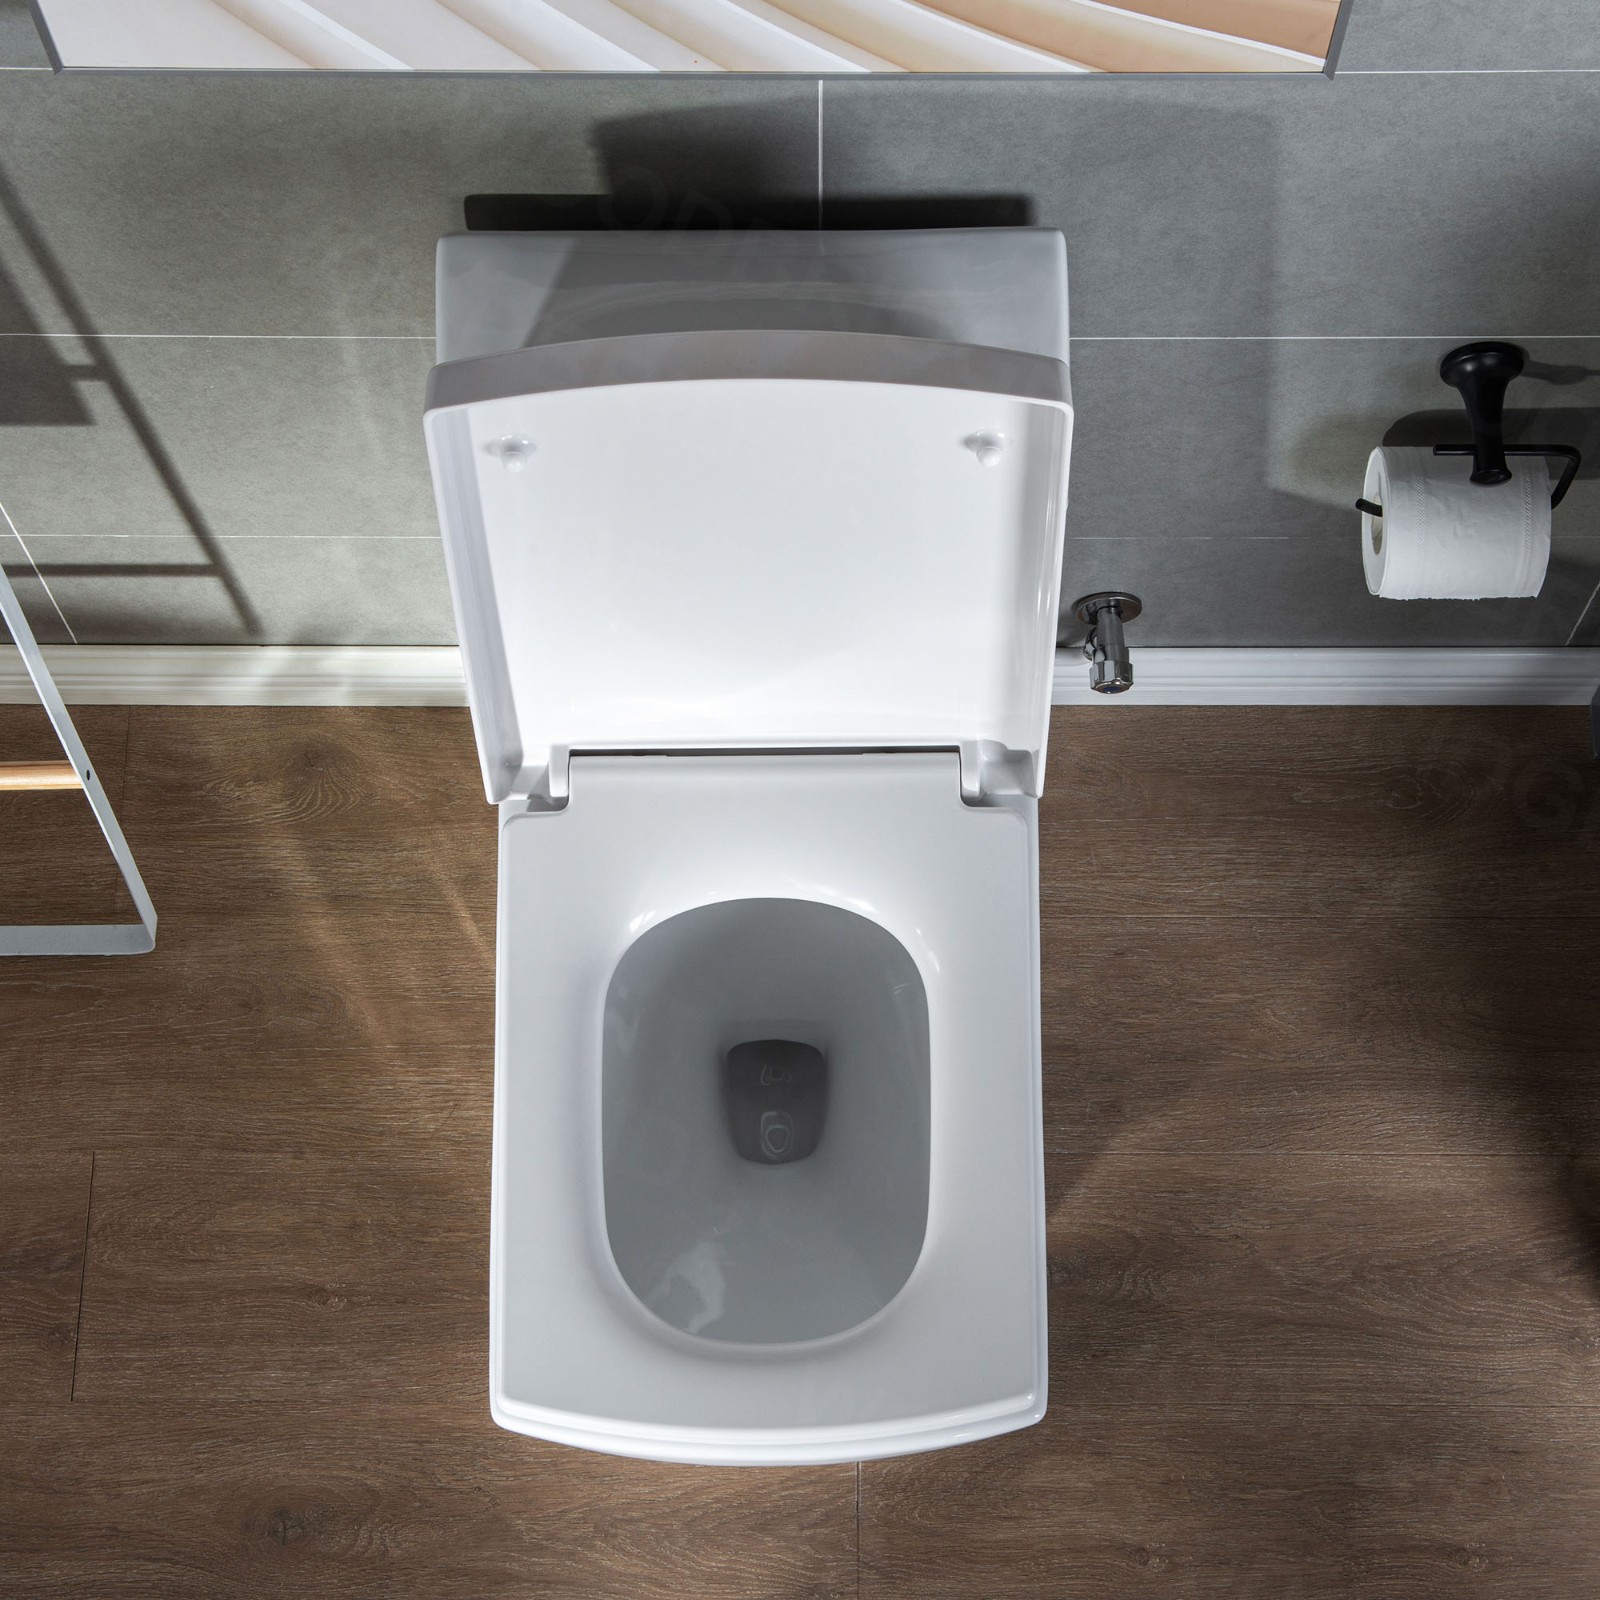  WOODBRIDGE B-0920-A Modern One-Piece Elongated Square toilet with Solf Closed Seat and Hand Free Touchless Sensor Flush Kit, White_5456